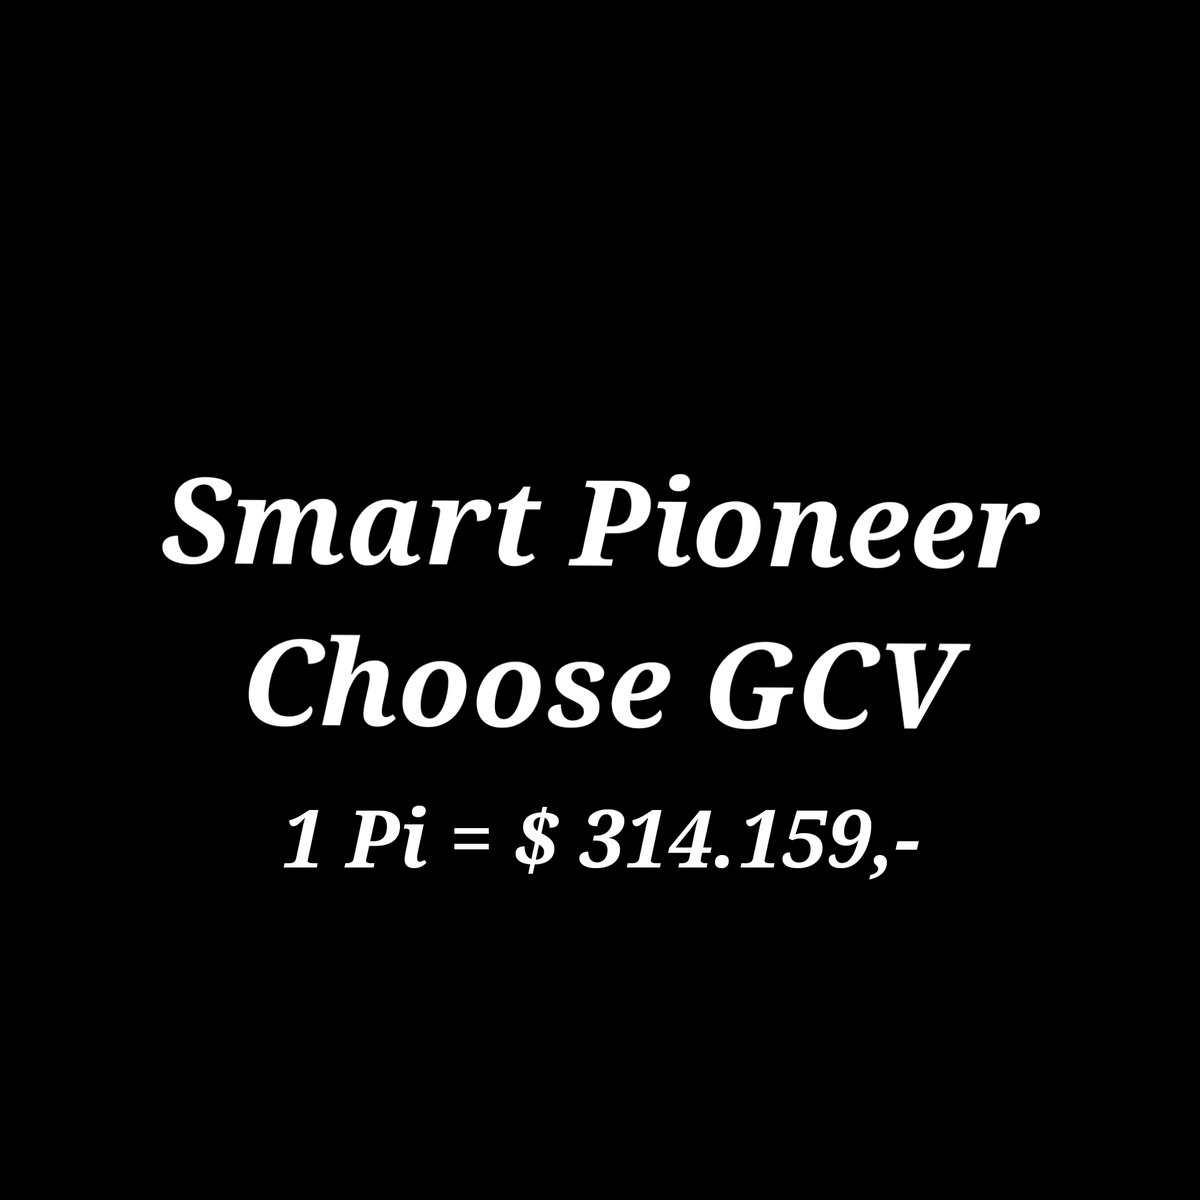 ⚡  How many of you Pioneers support 1π  =  $314,159 ❓ 🤔

✨  Let me see a Repost if you agree to 'Global Consensus Value' or GCV  🤝  of 1π  =  $314,159  💯

@PiCoreTeam @limewire #PiNetwork #PiGCV #PiCoin